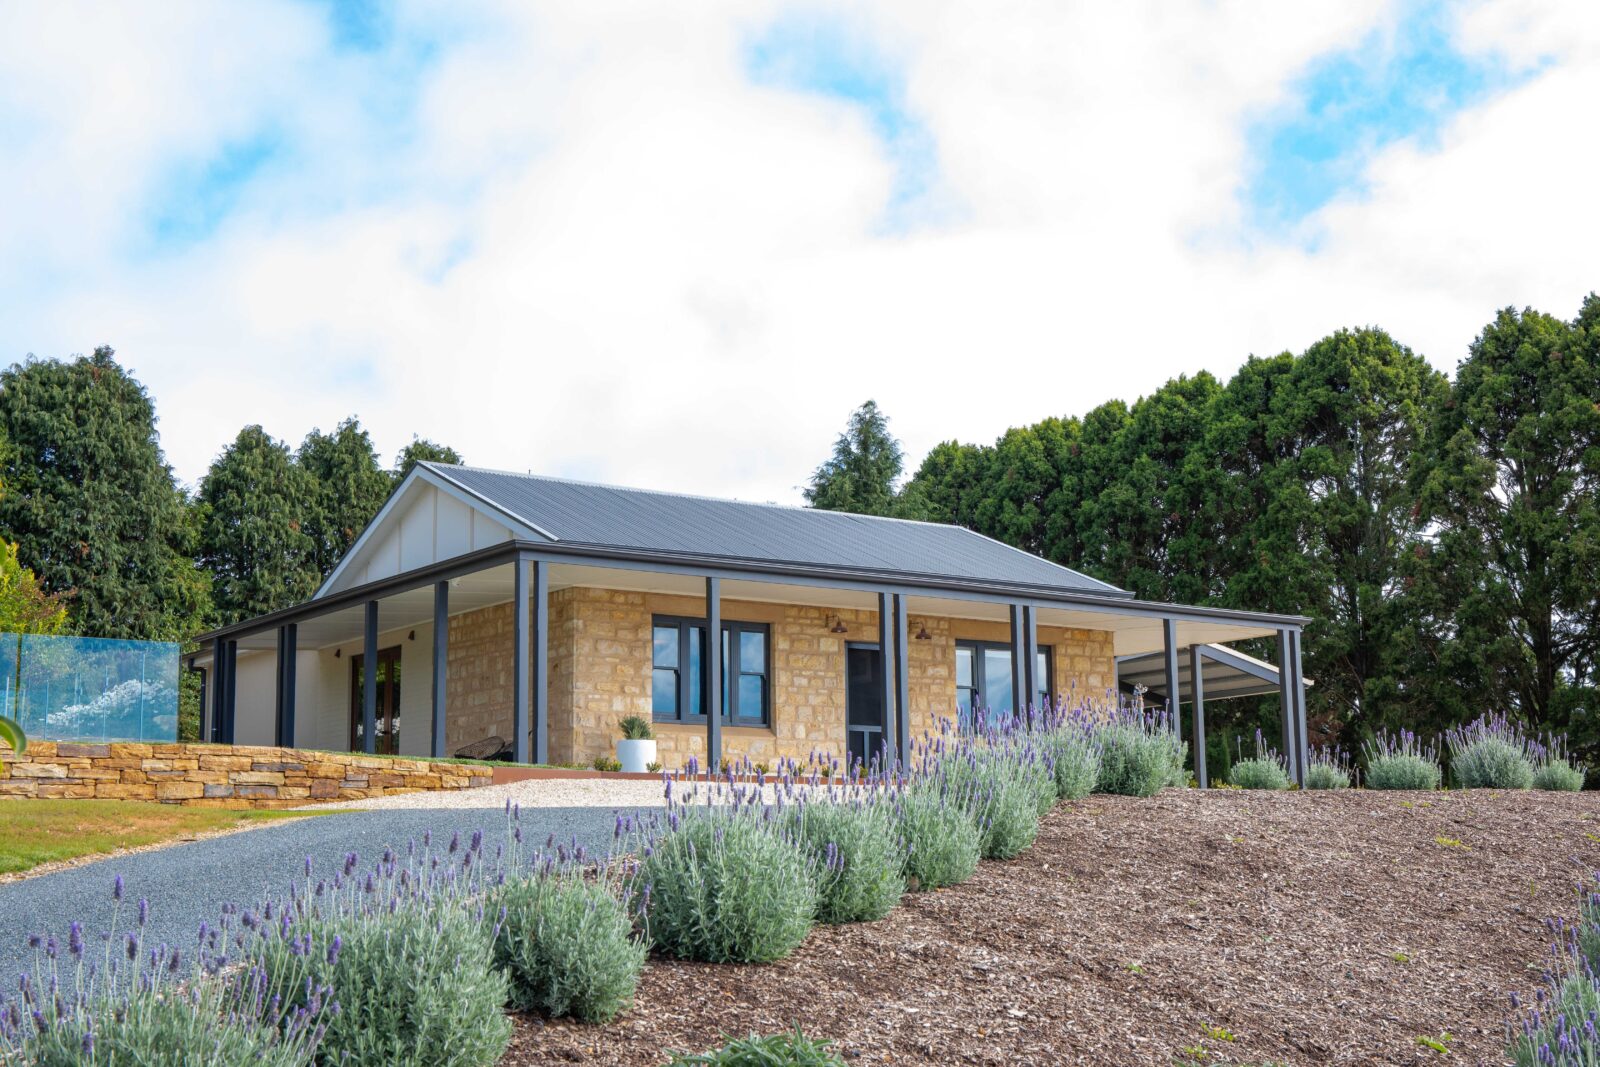 Adelaide Hills House is a stone cottage with views across the Piccadilly Valley in South Australia.